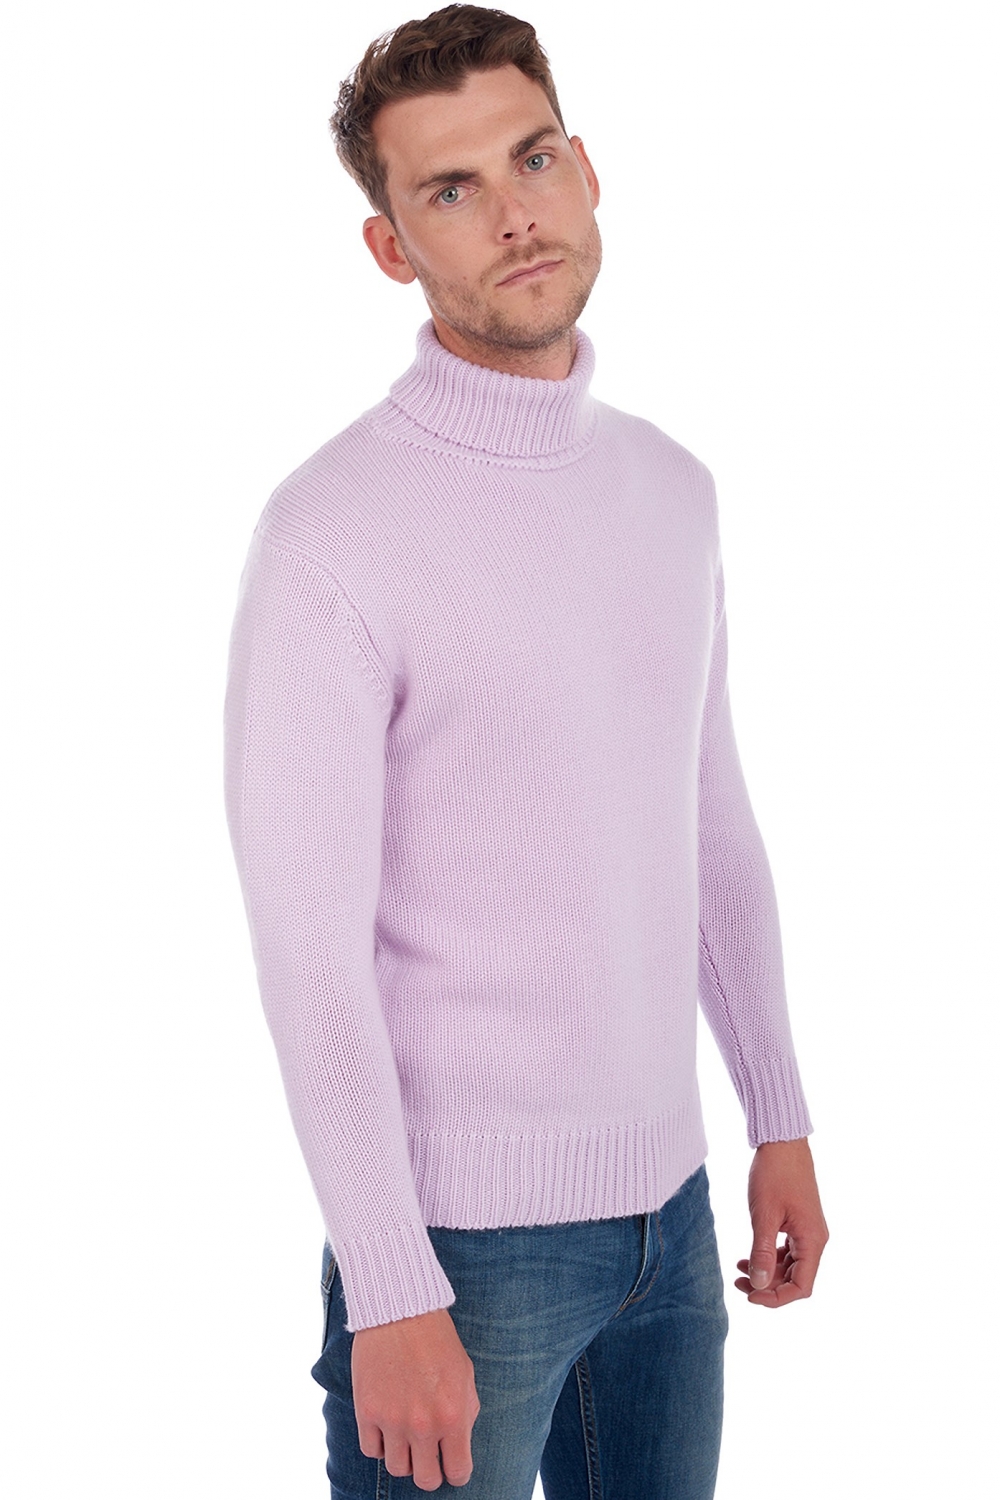 Cachemire pull homme artemi lilas xl